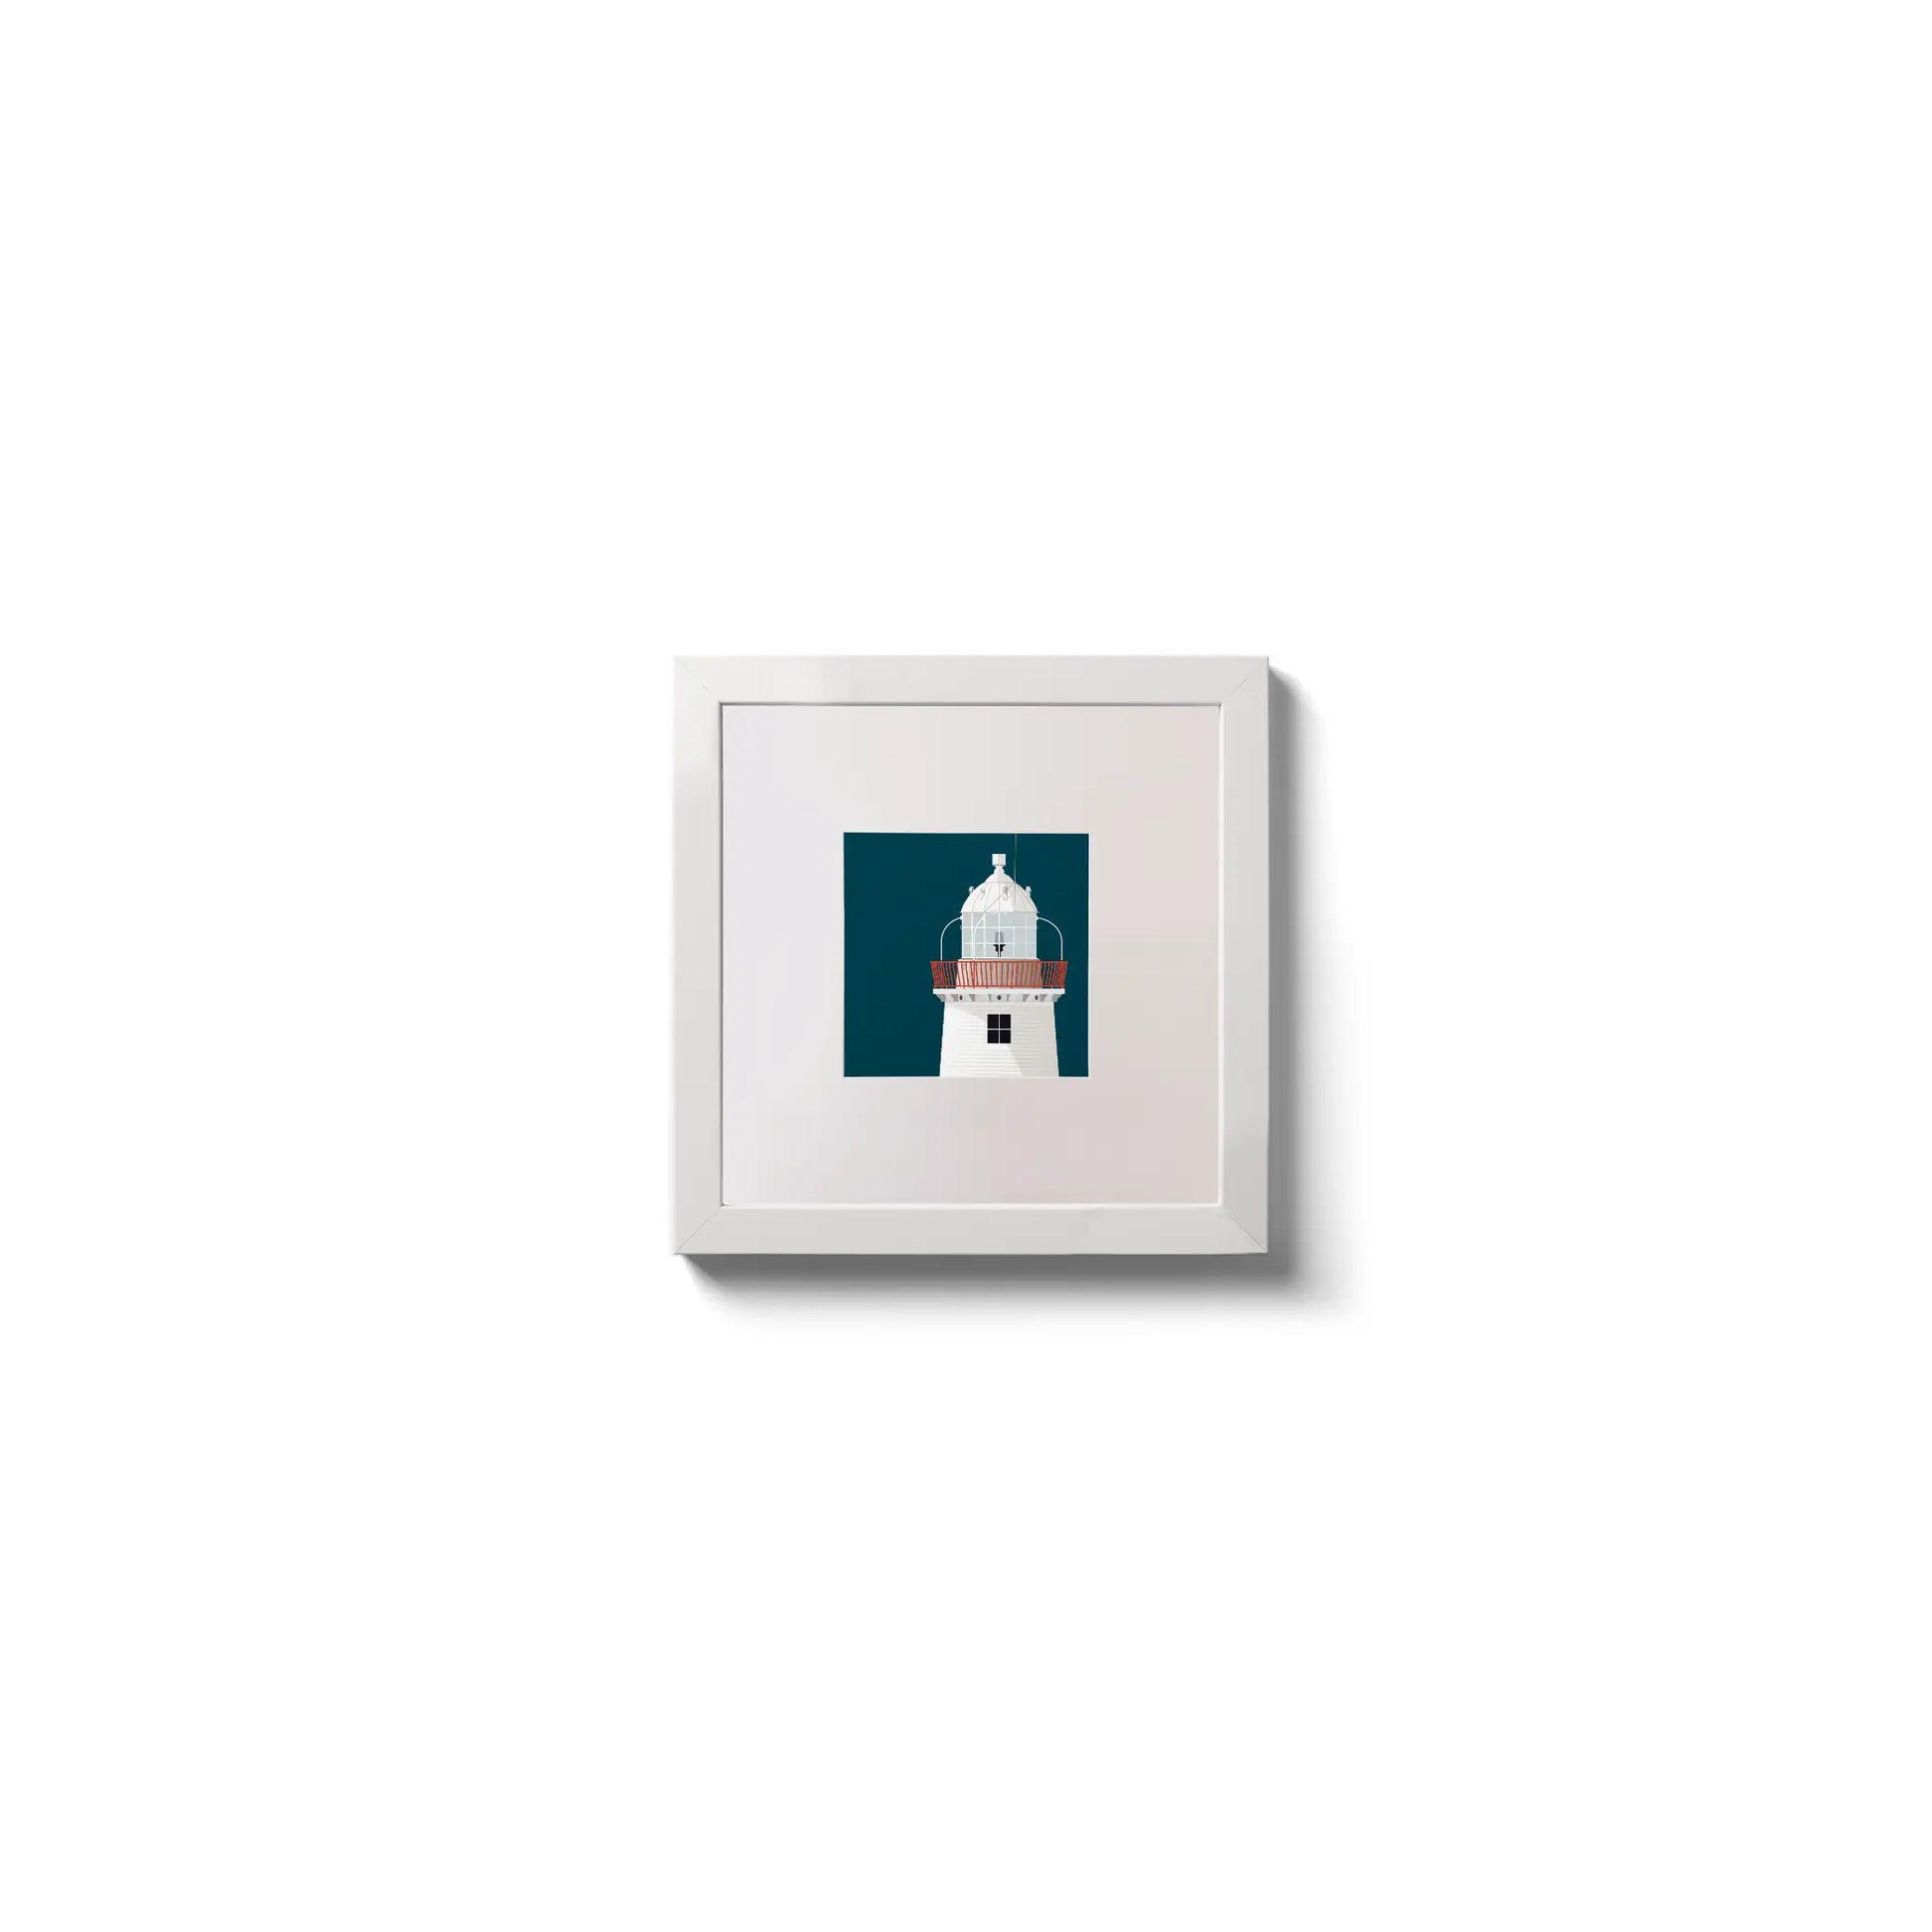 Illustration of Inishgort lighthouse on a midnight blue background,  in a white square frame measuring 10x10cm.